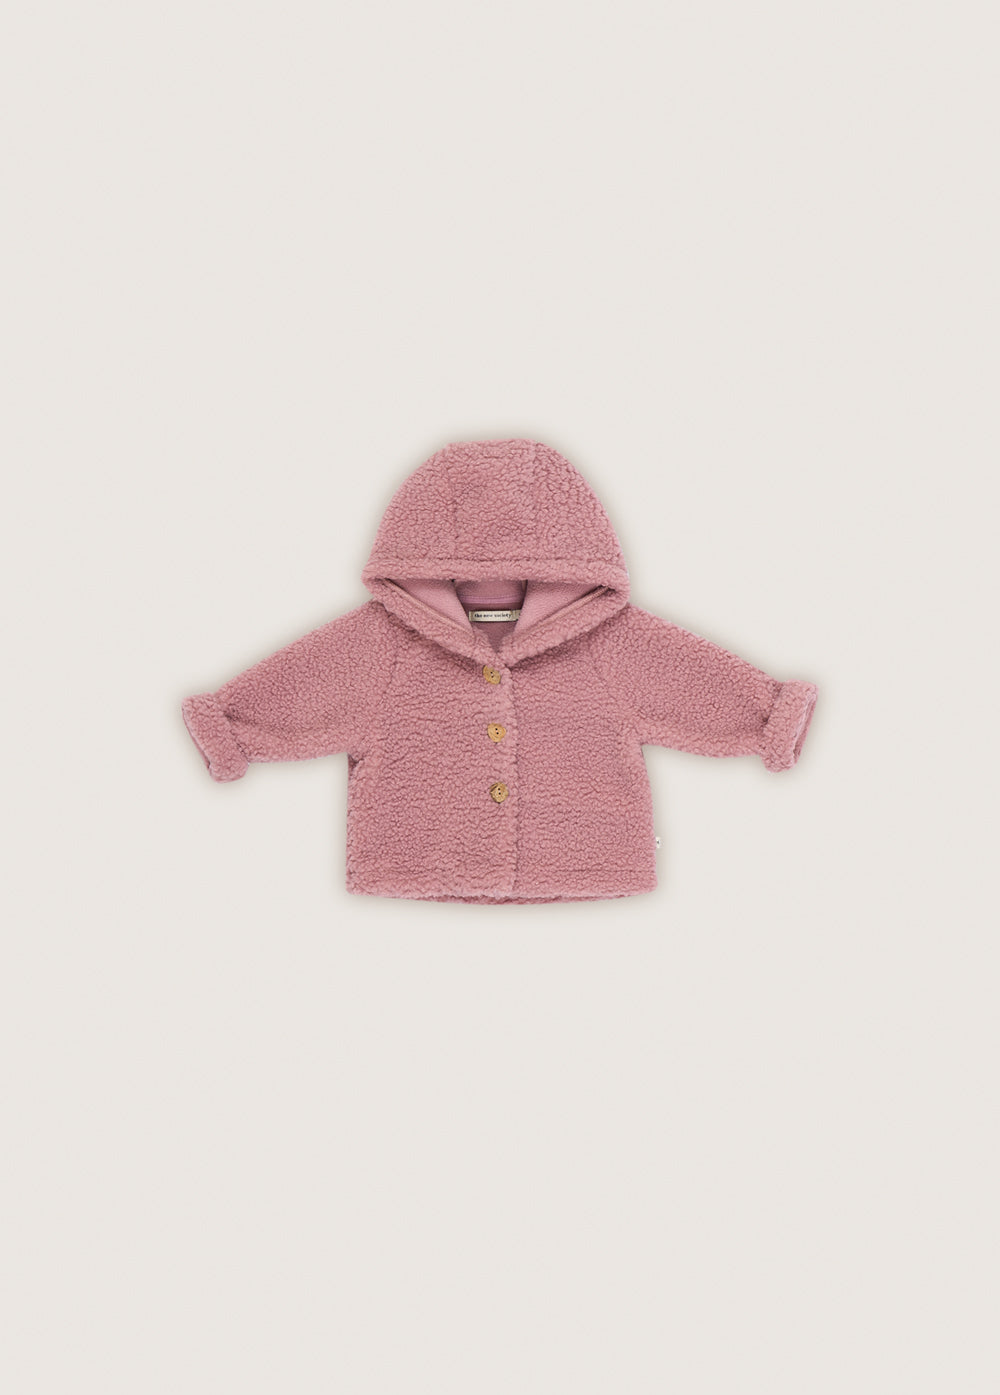 Manteau Aike dusty orchid babygirl - The new society - H23